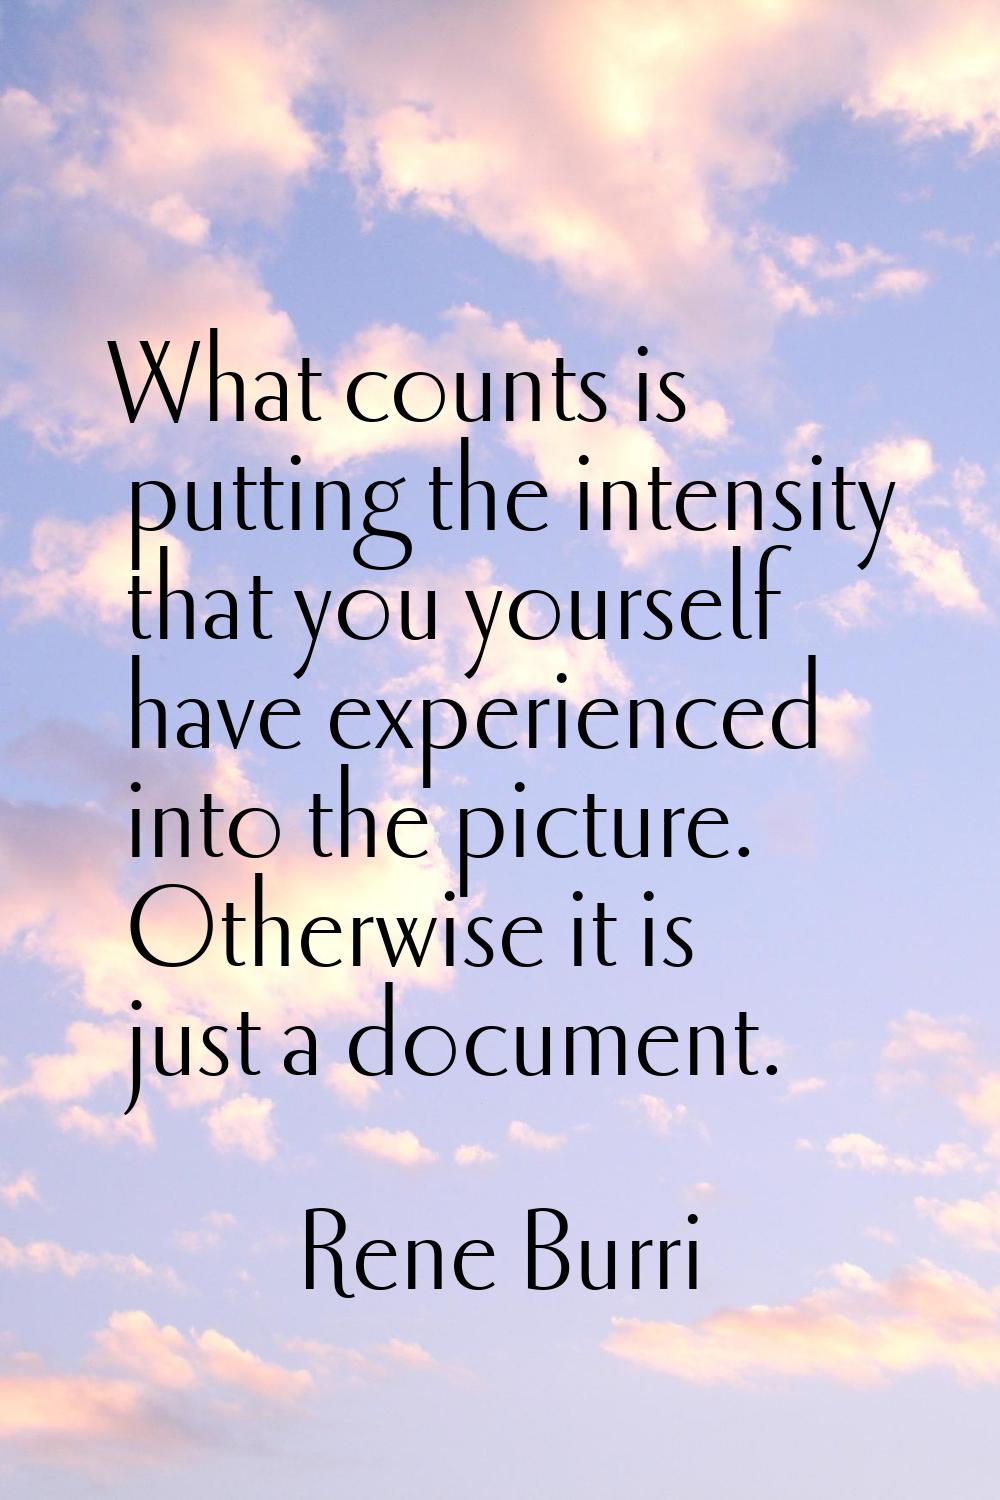 What counts is putting the intensity that you yourself have experienced into the picture. Otherwise